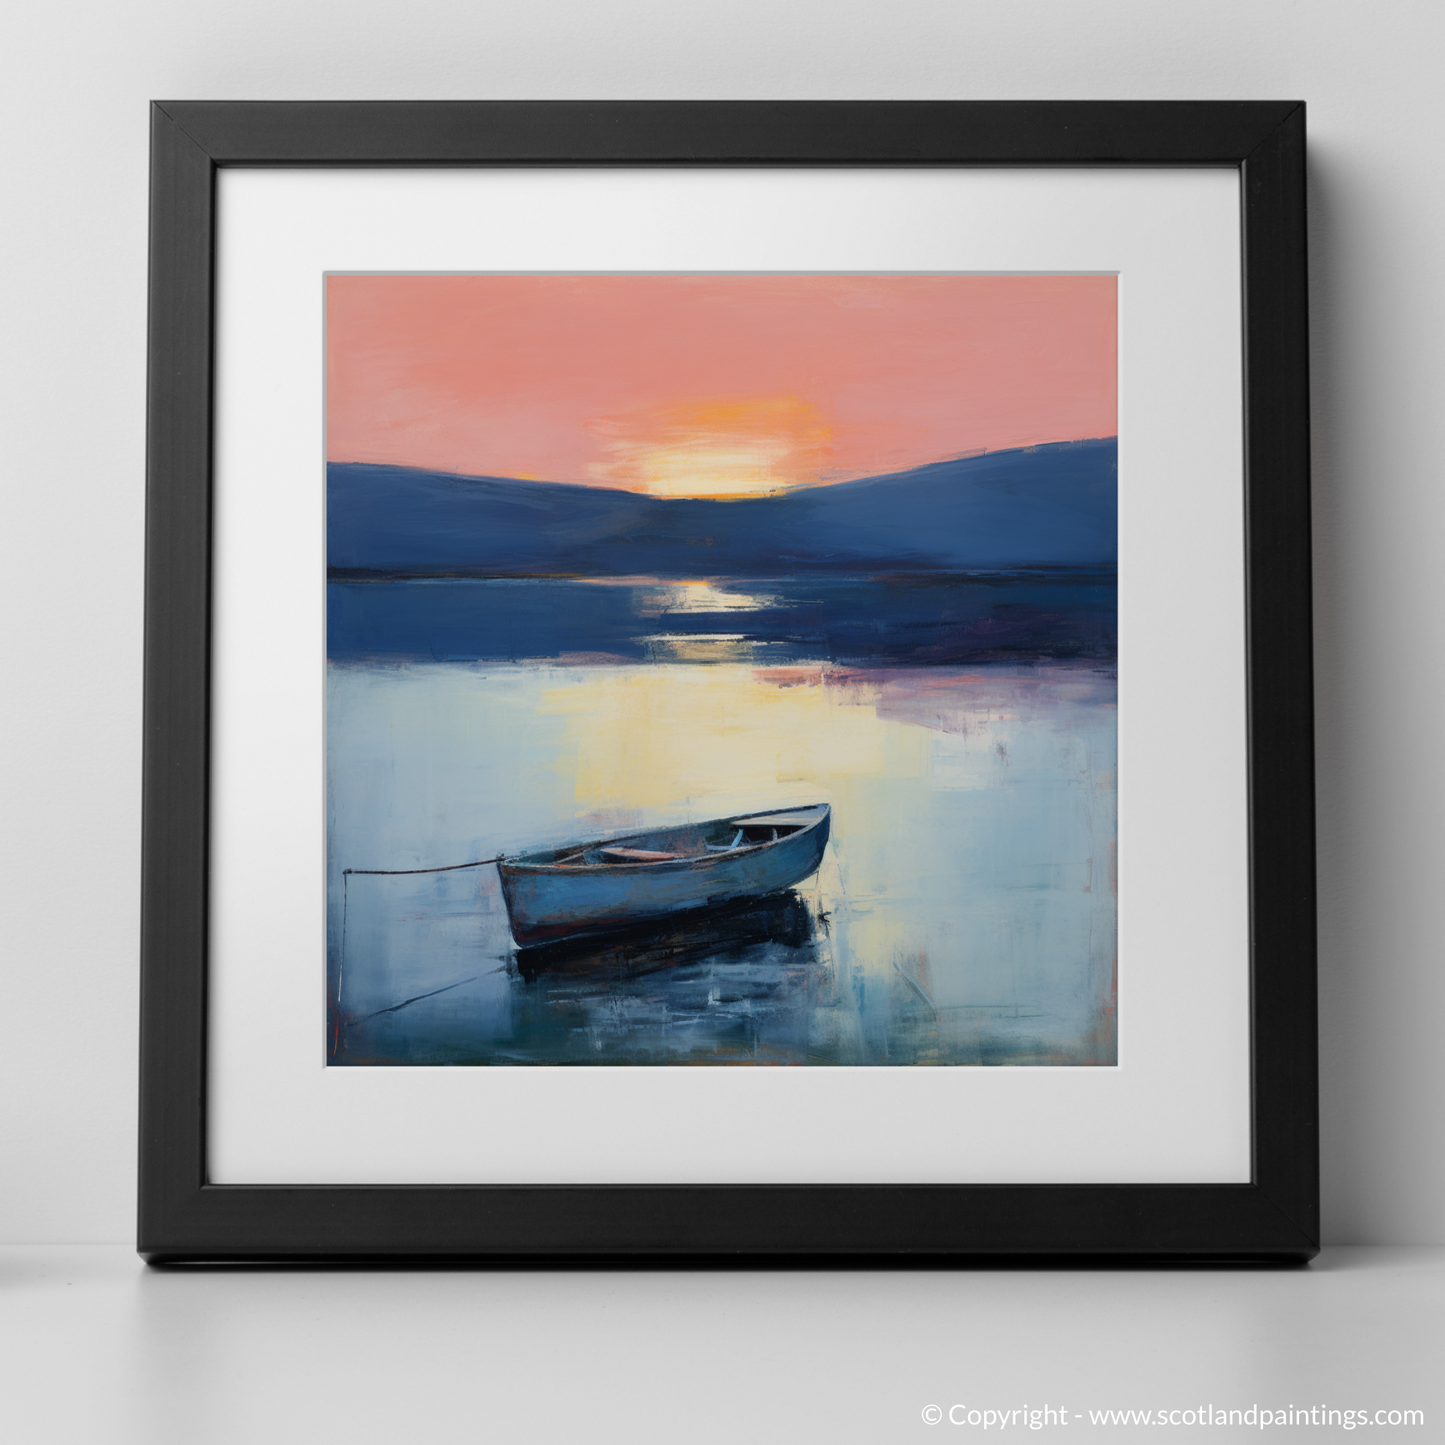 Art Print of Lone rowboat on Loch Lomond at dusk with a black frame